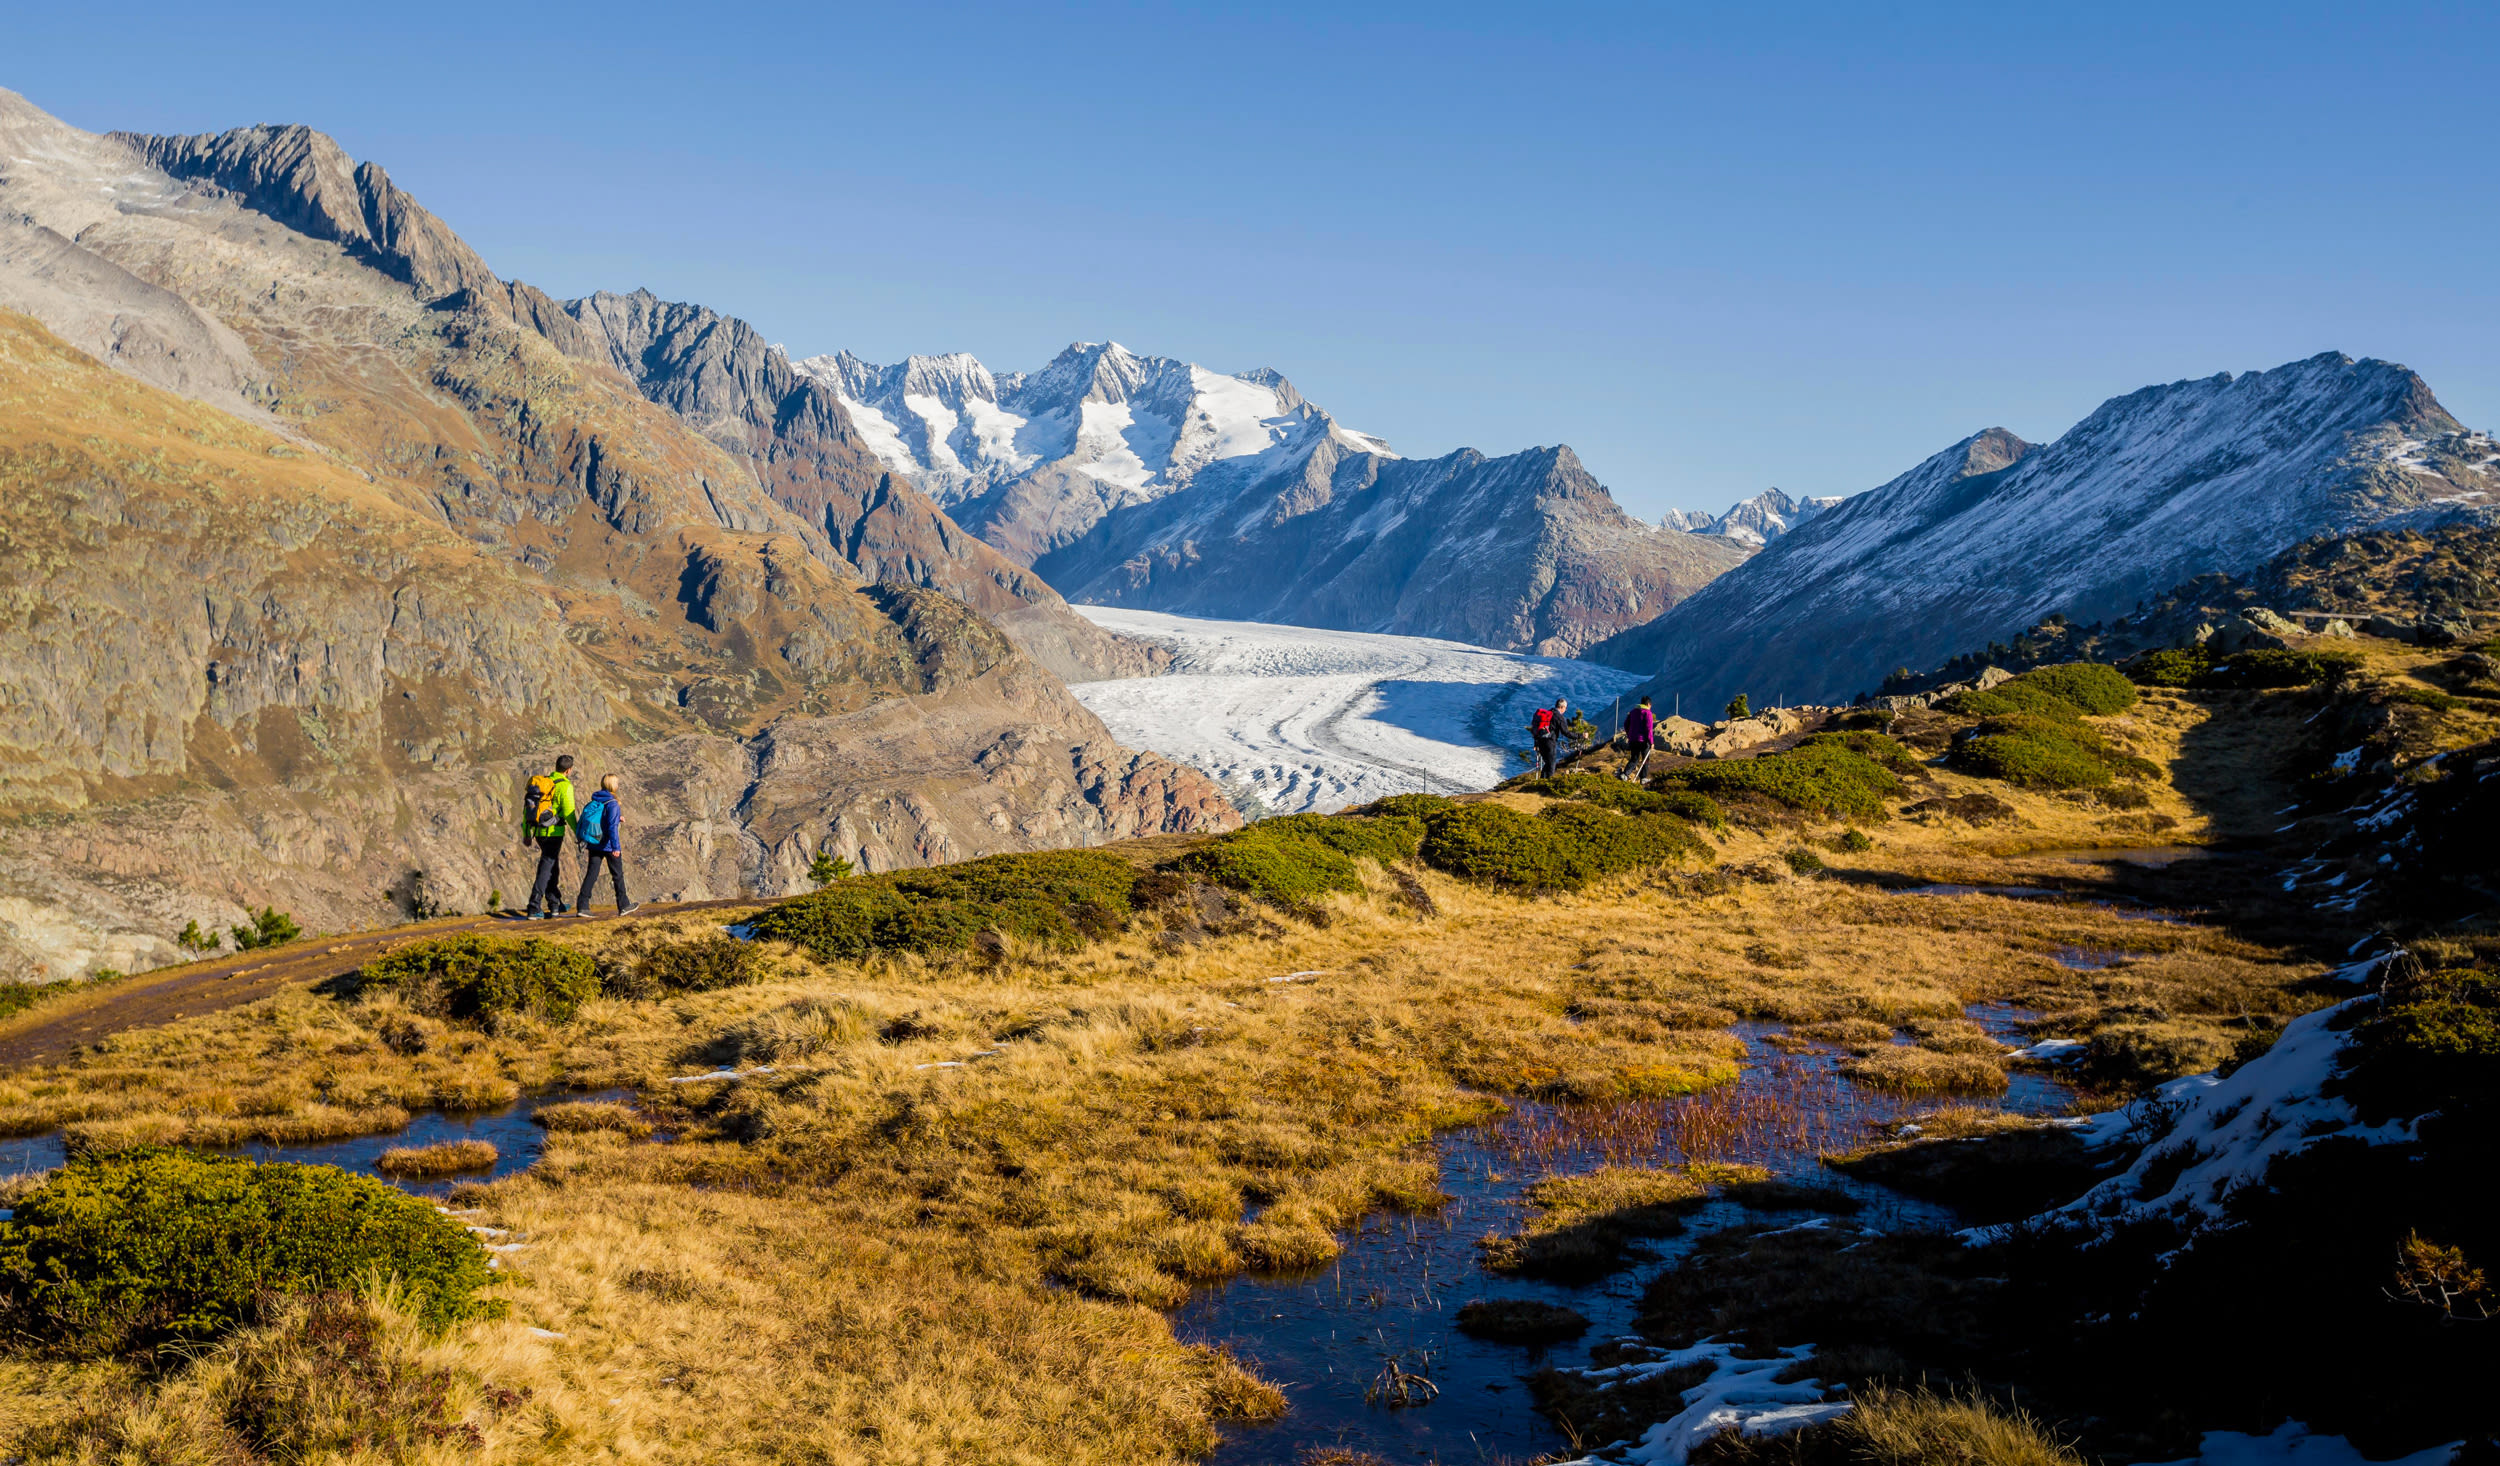 People hike to the Aletsch glacier, the view is beautiful even more in autumn with the beautiful colors.
Valais, Switzerland.